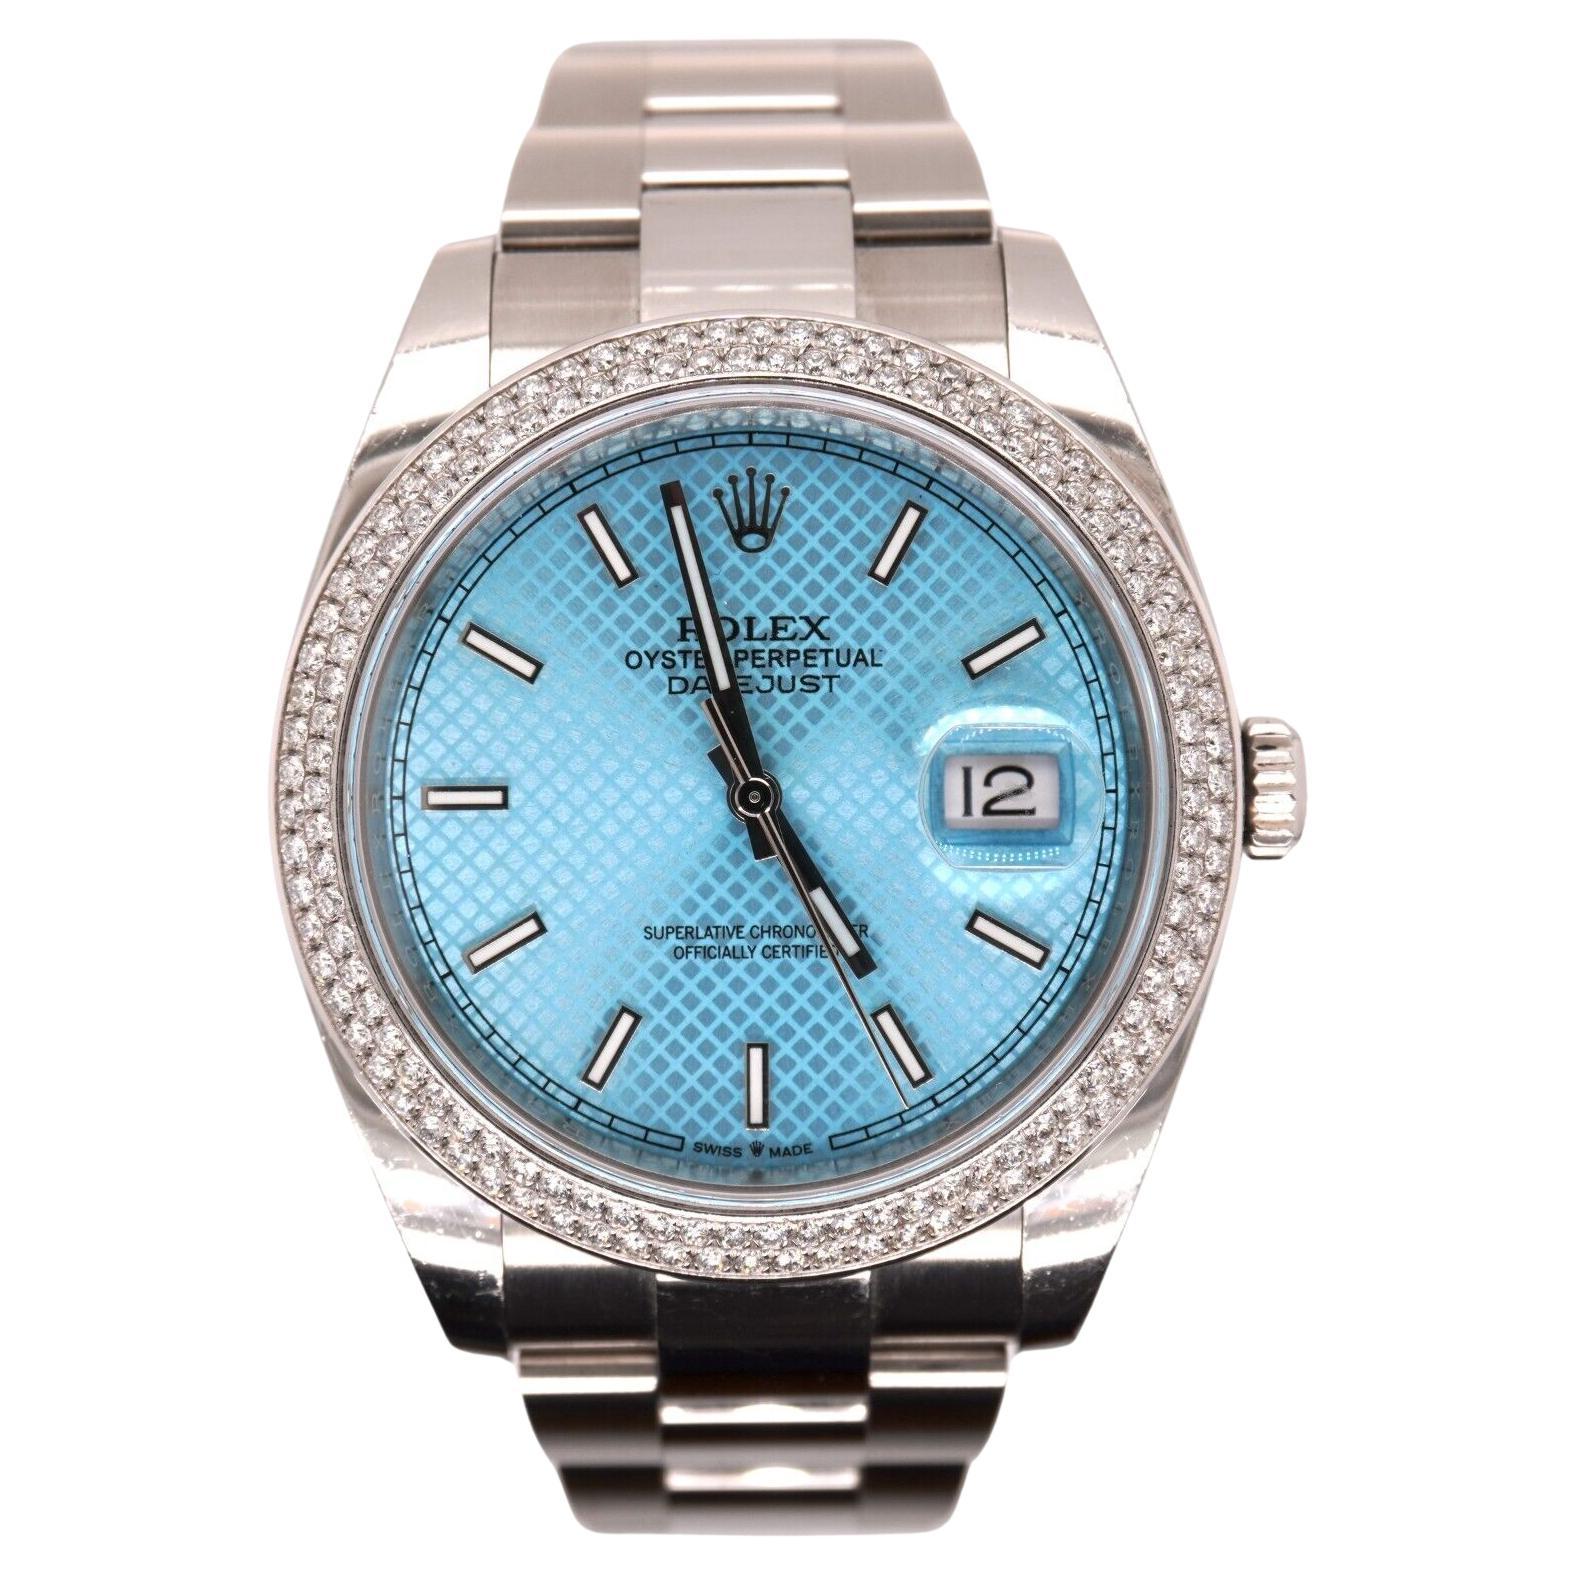 Rolex Men's Datejust 41mm Oyster Steel Watch ICED 2.50ct Diamond ICE Blue Dial For Sale